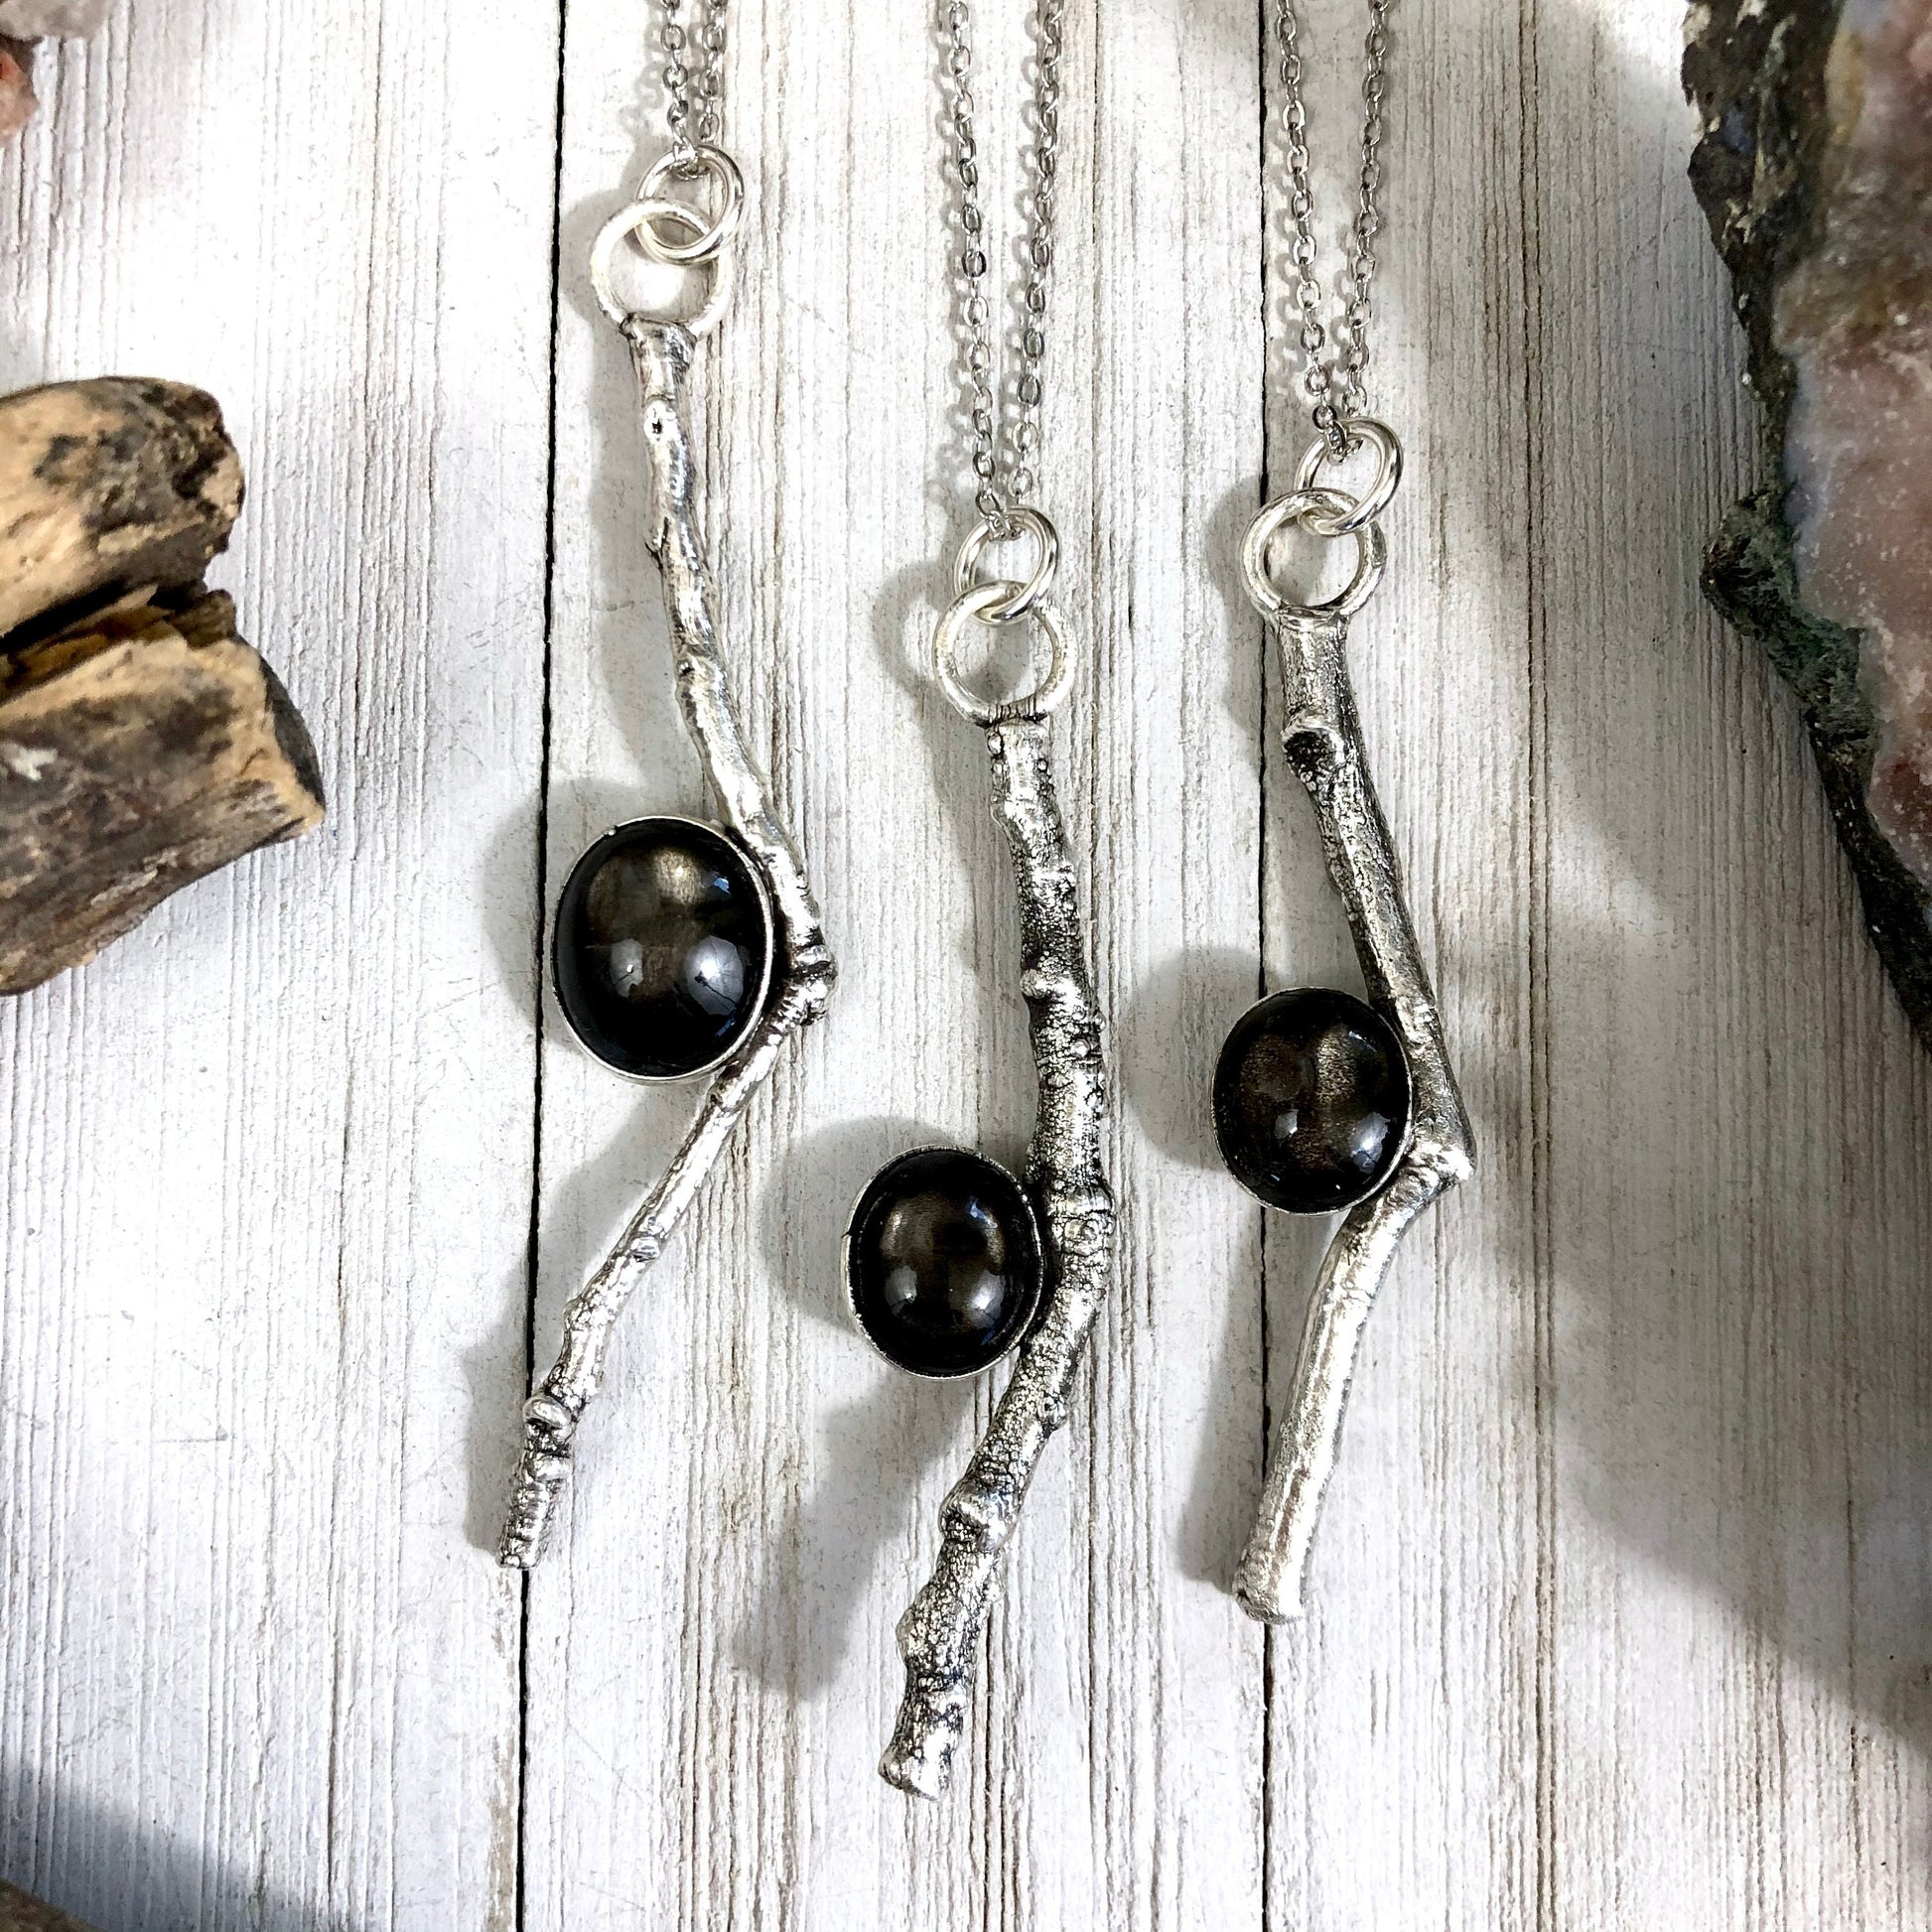 big crystal Necklace, Big Gothic Necklace, Big Silver Necklace, Big Stone Necklace, Black Star sunstone, Bohemian Jewelry, Crystal Necklaces, Crystal Pendant, Etsy ID: 1100791057, FOXLARK- NECKLACES, Jewelry, nature inspired, Necklaces, sale, Silver Sheen